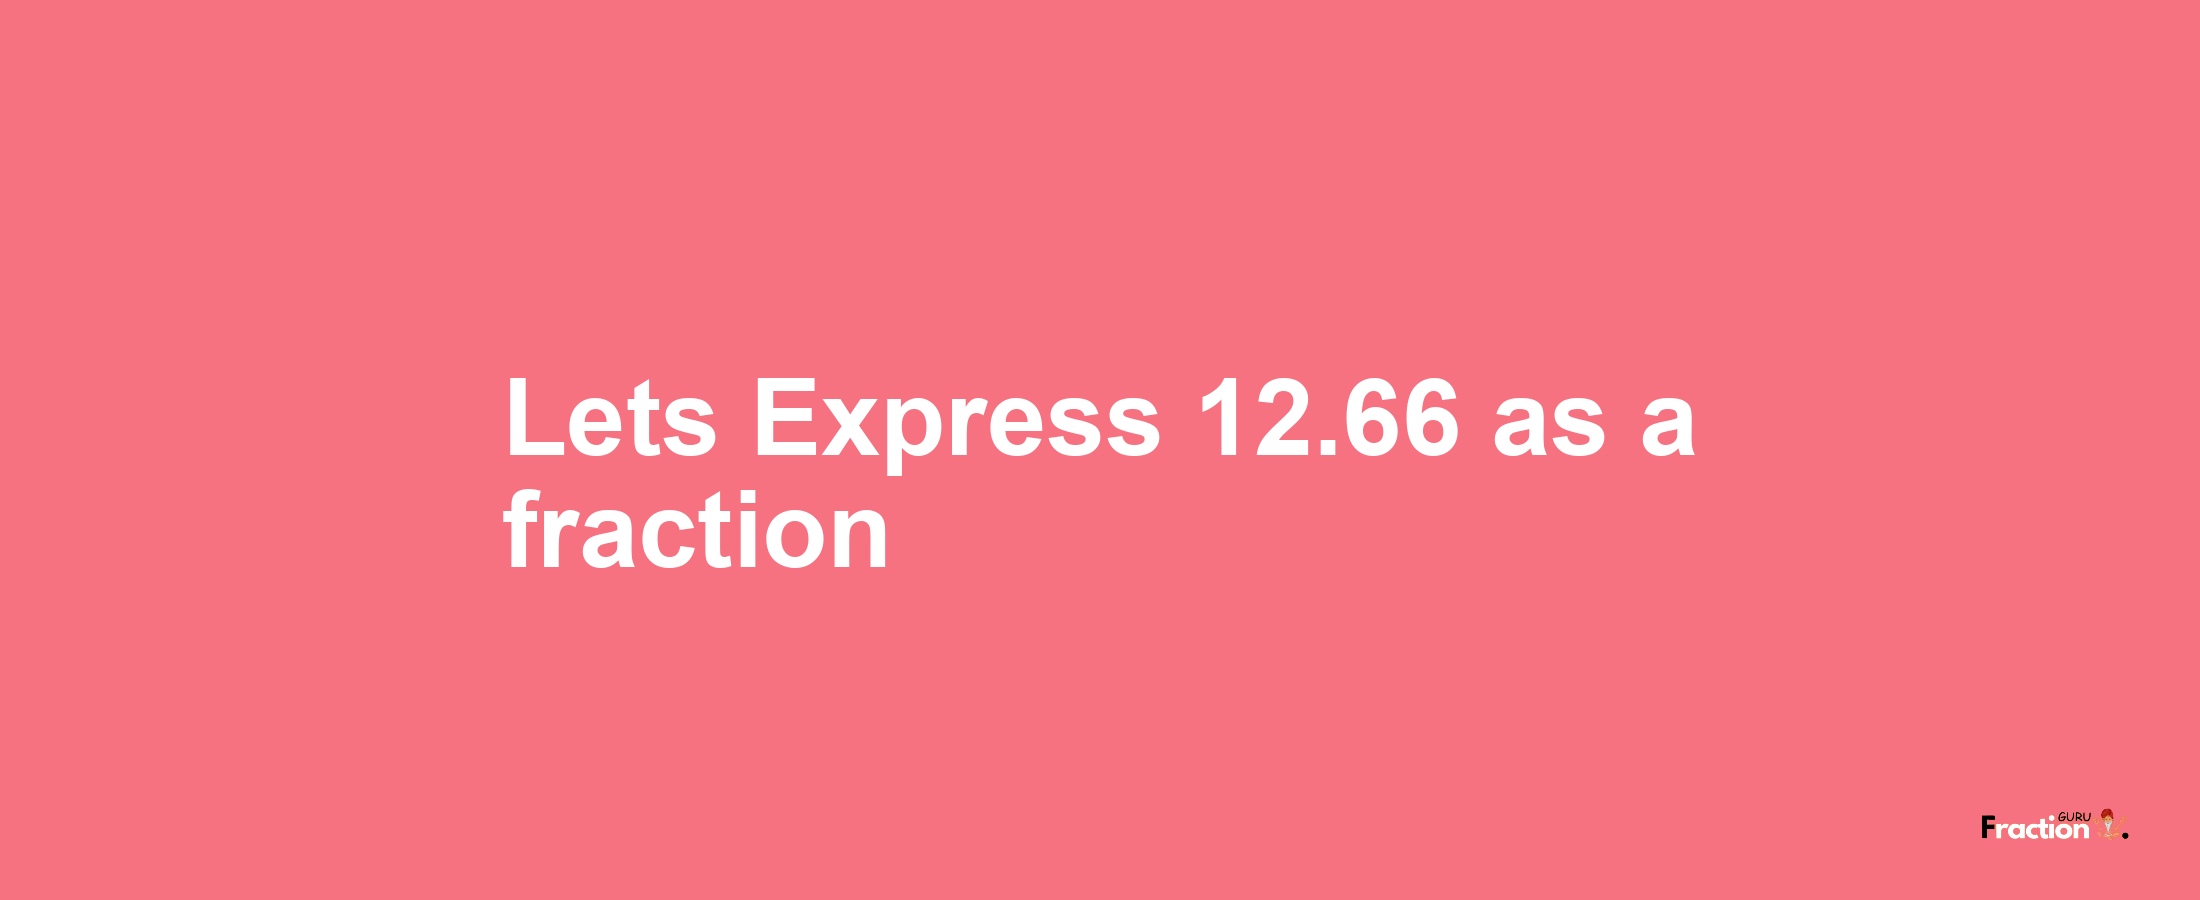 Lets Express 12.66 as afraction